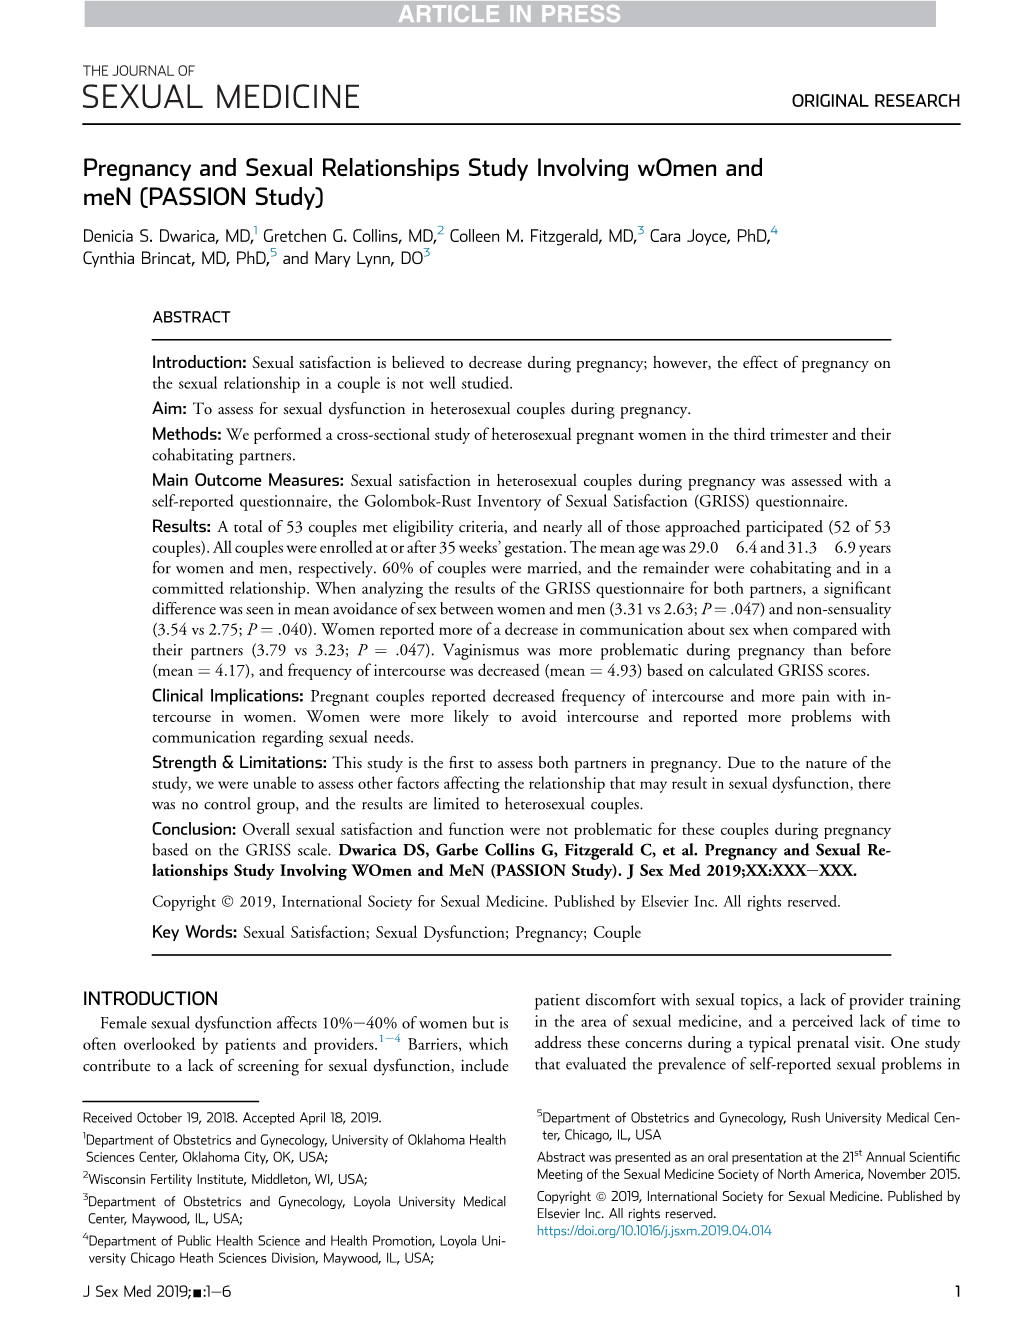 Pregnancy and Sexual Relationships Study Involving Women and Men (PASSION Study)